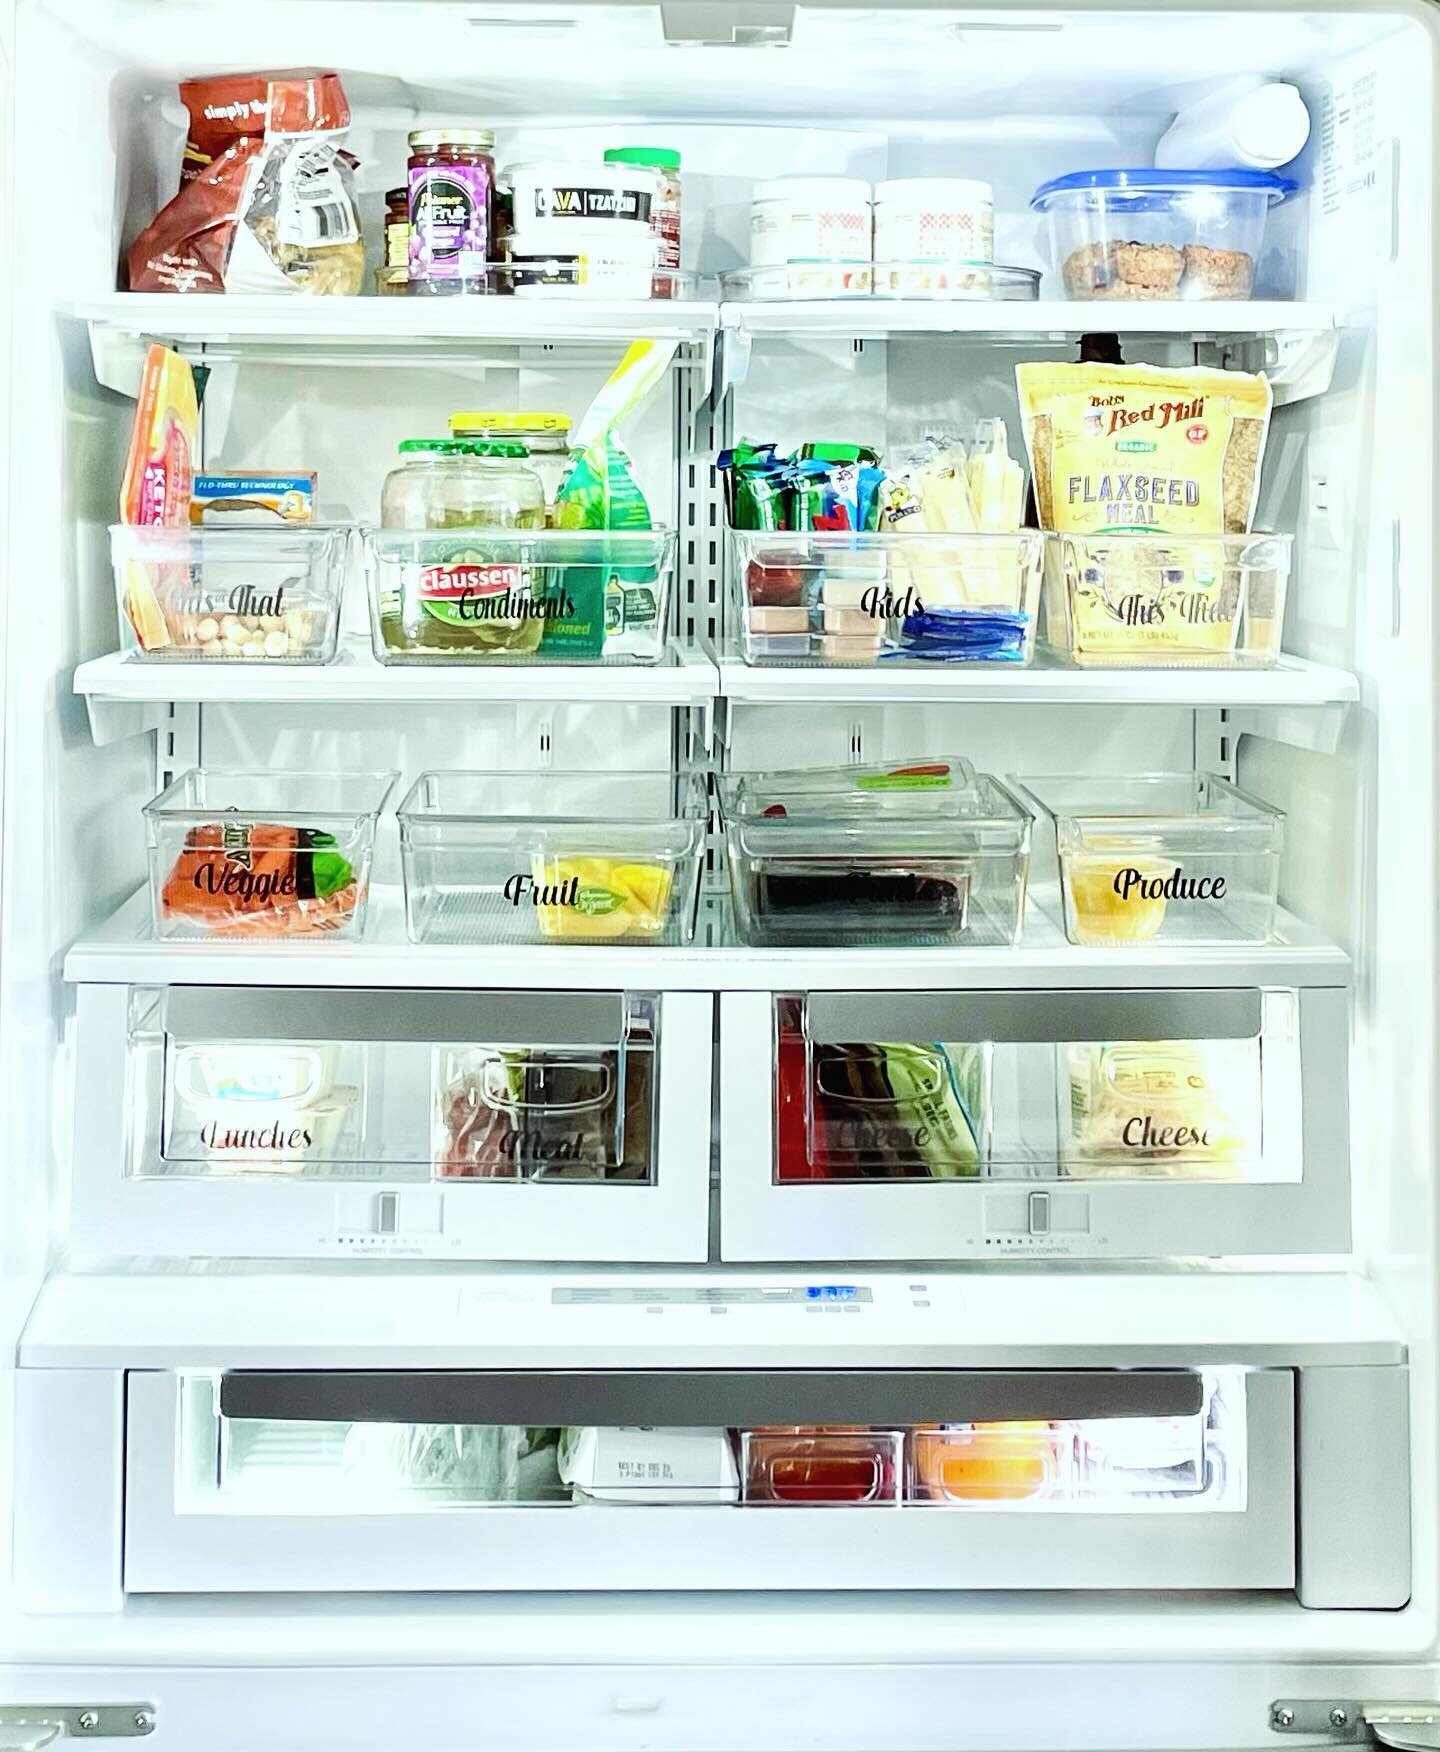 Friday Fridge AFTER⚜️
(Swipe twice for the BEFORE)

&ldquo;Organizing your fridge for maximum efficiency - in terms of food shelf life, food safety, and easy access to the things you reach for most - should be a top priority.&rdquo; @kenjilopezalt 

